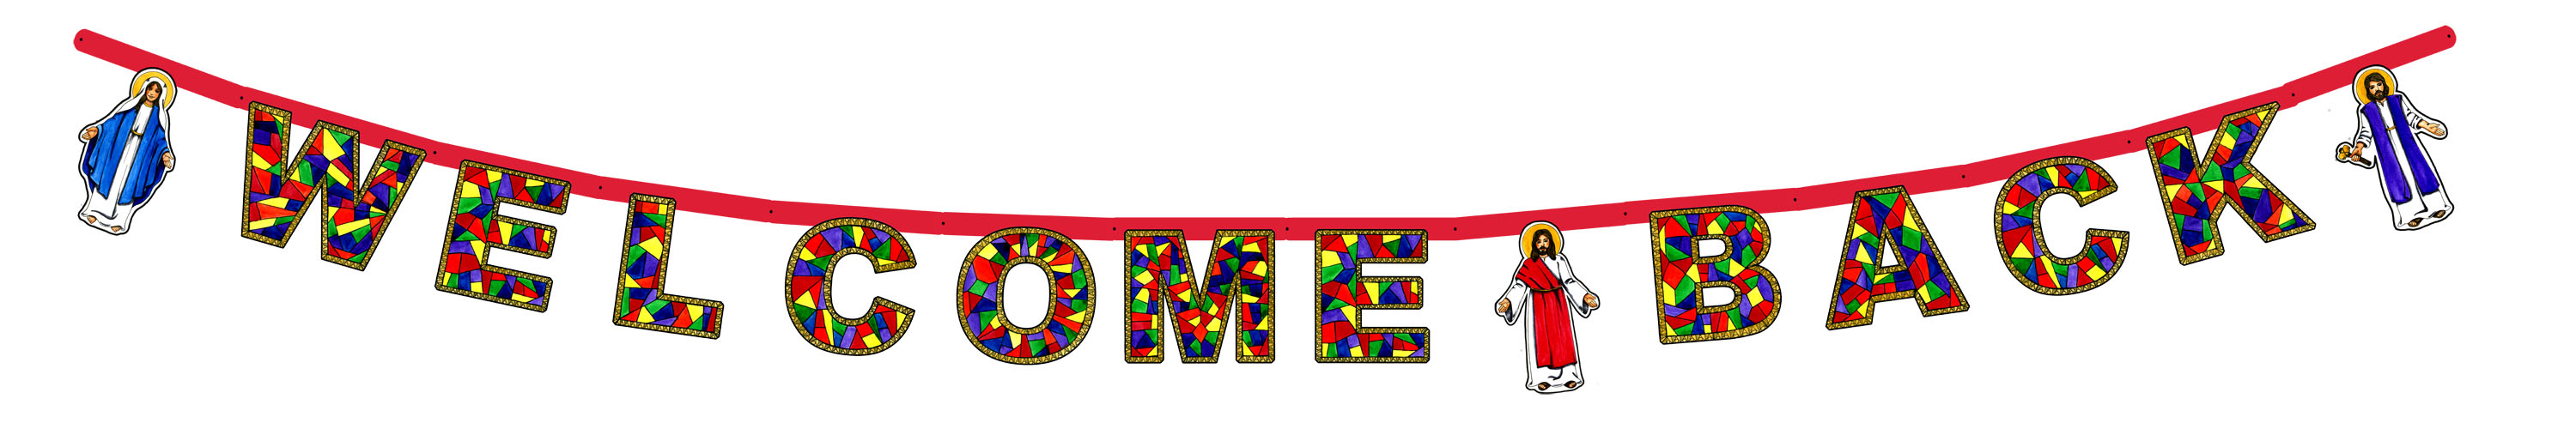 welcome back to school clipart printable